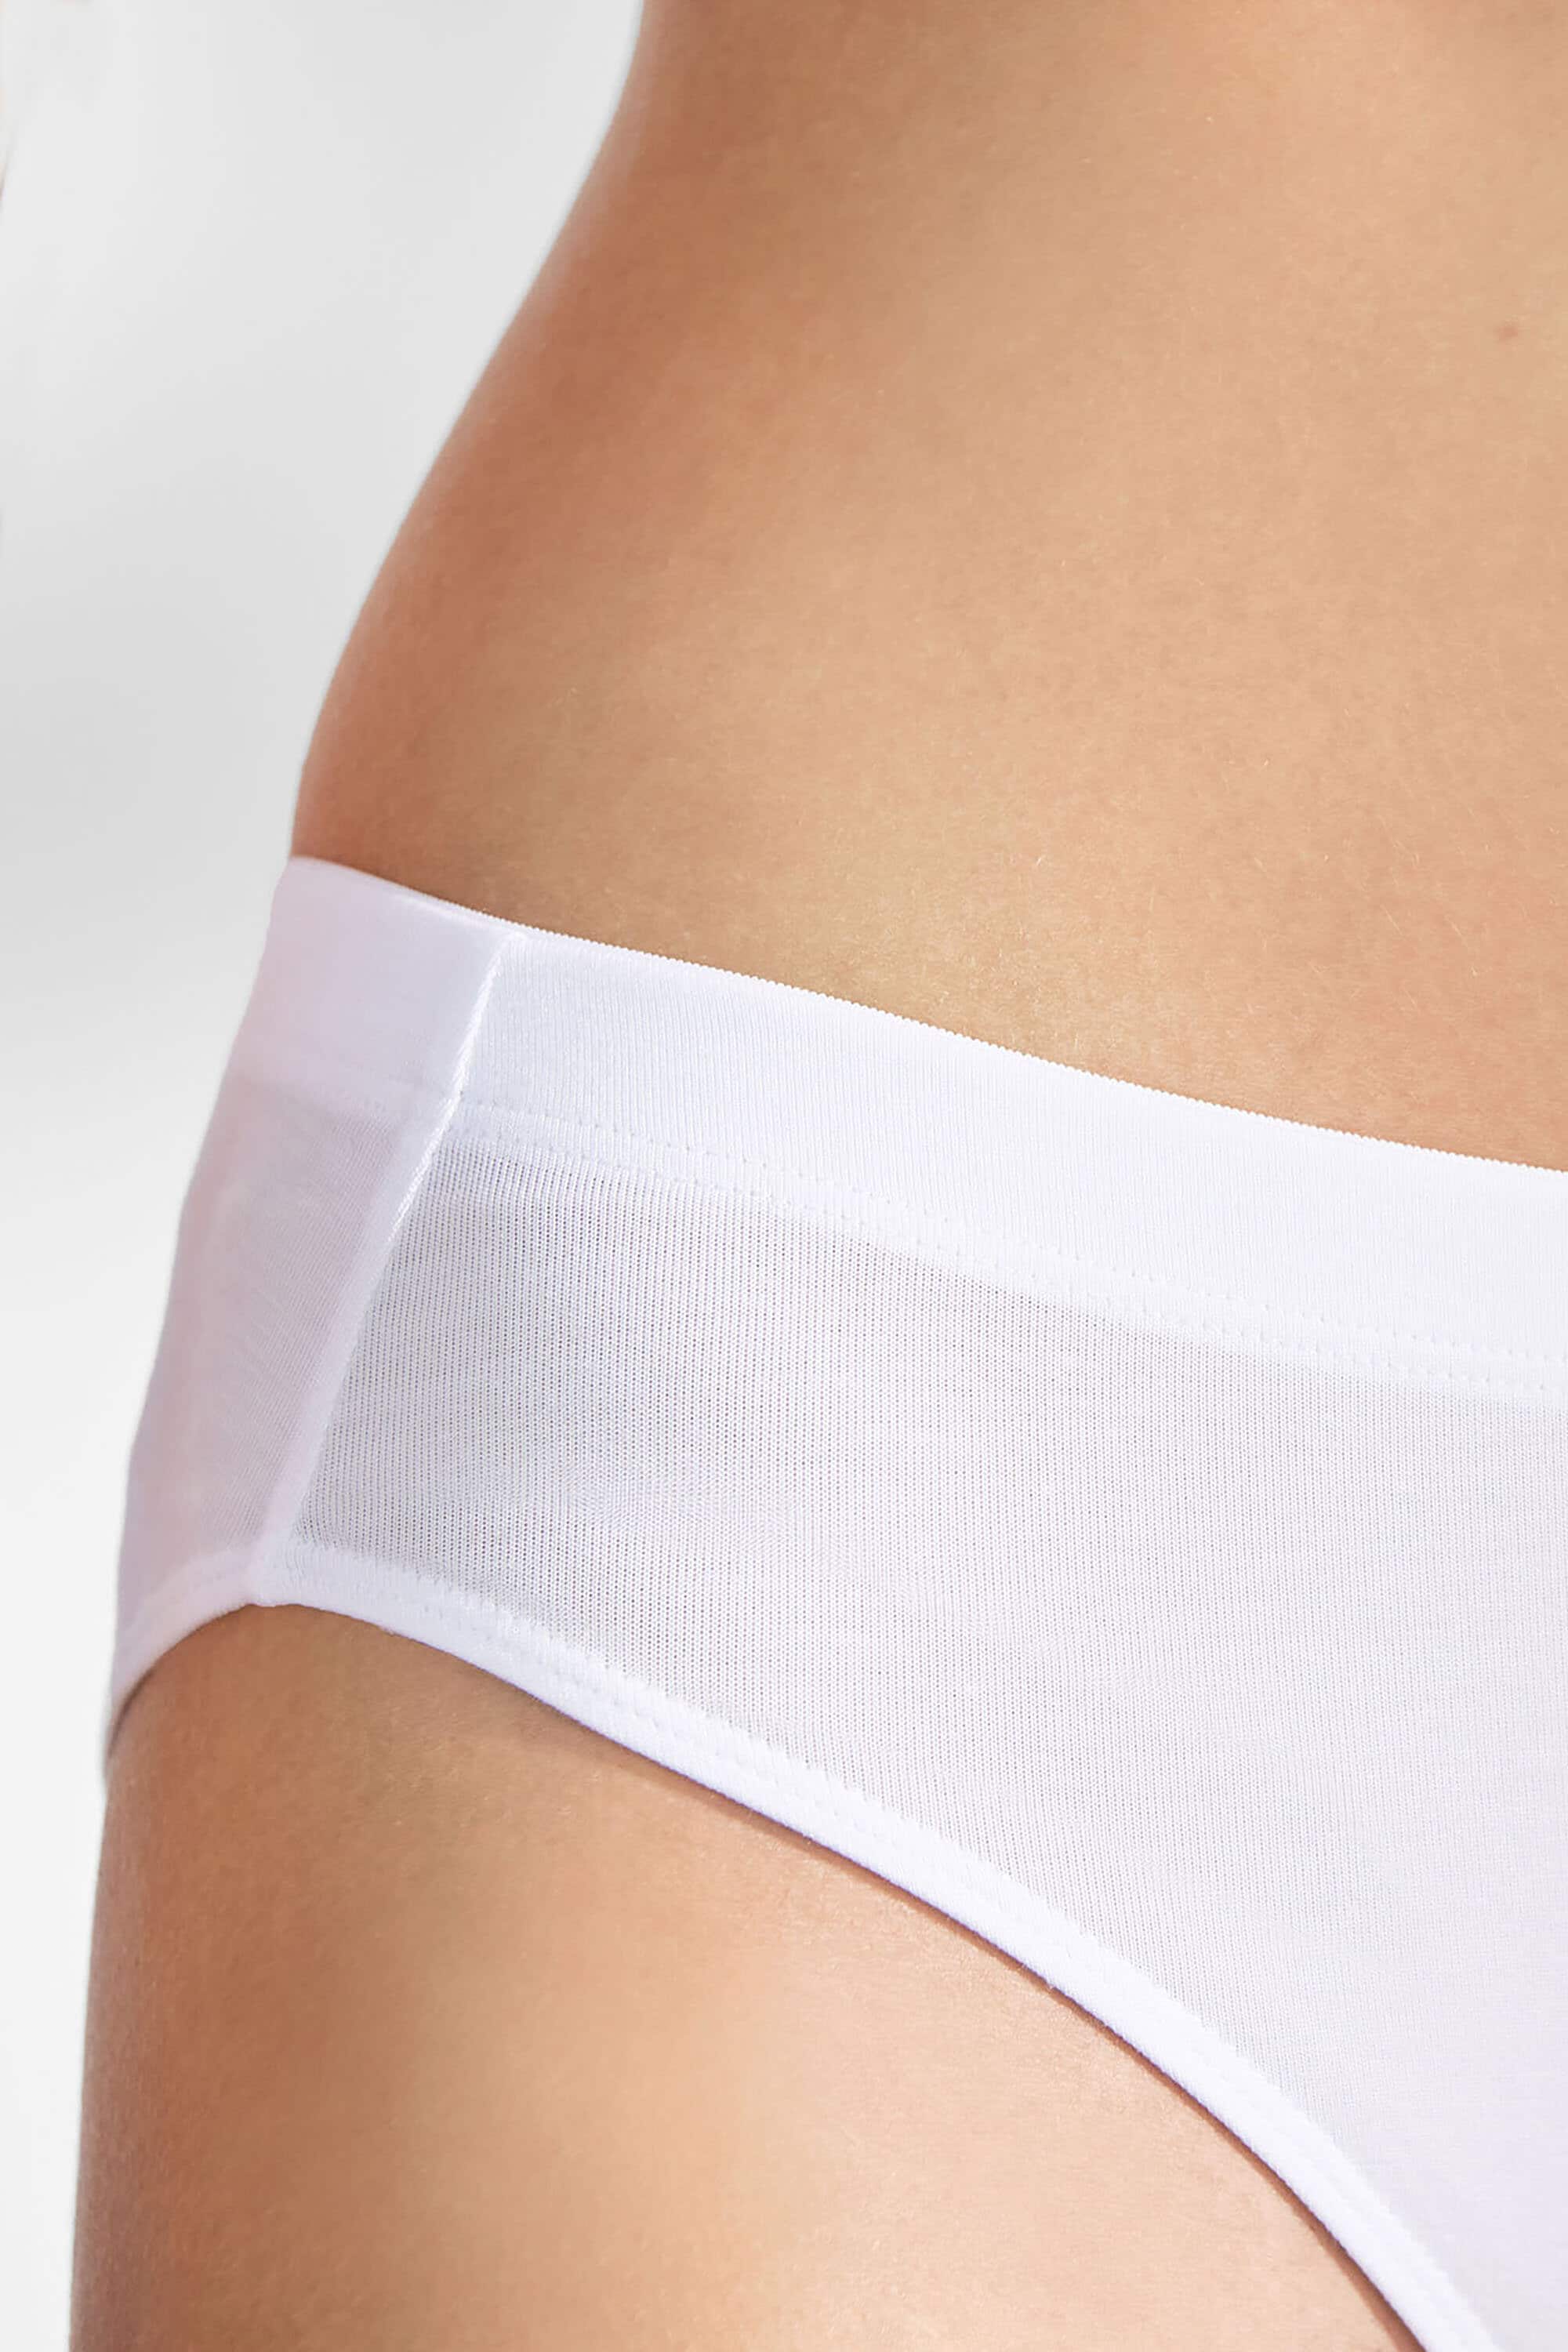 women underwear, panty, micromodal Color White Size Small